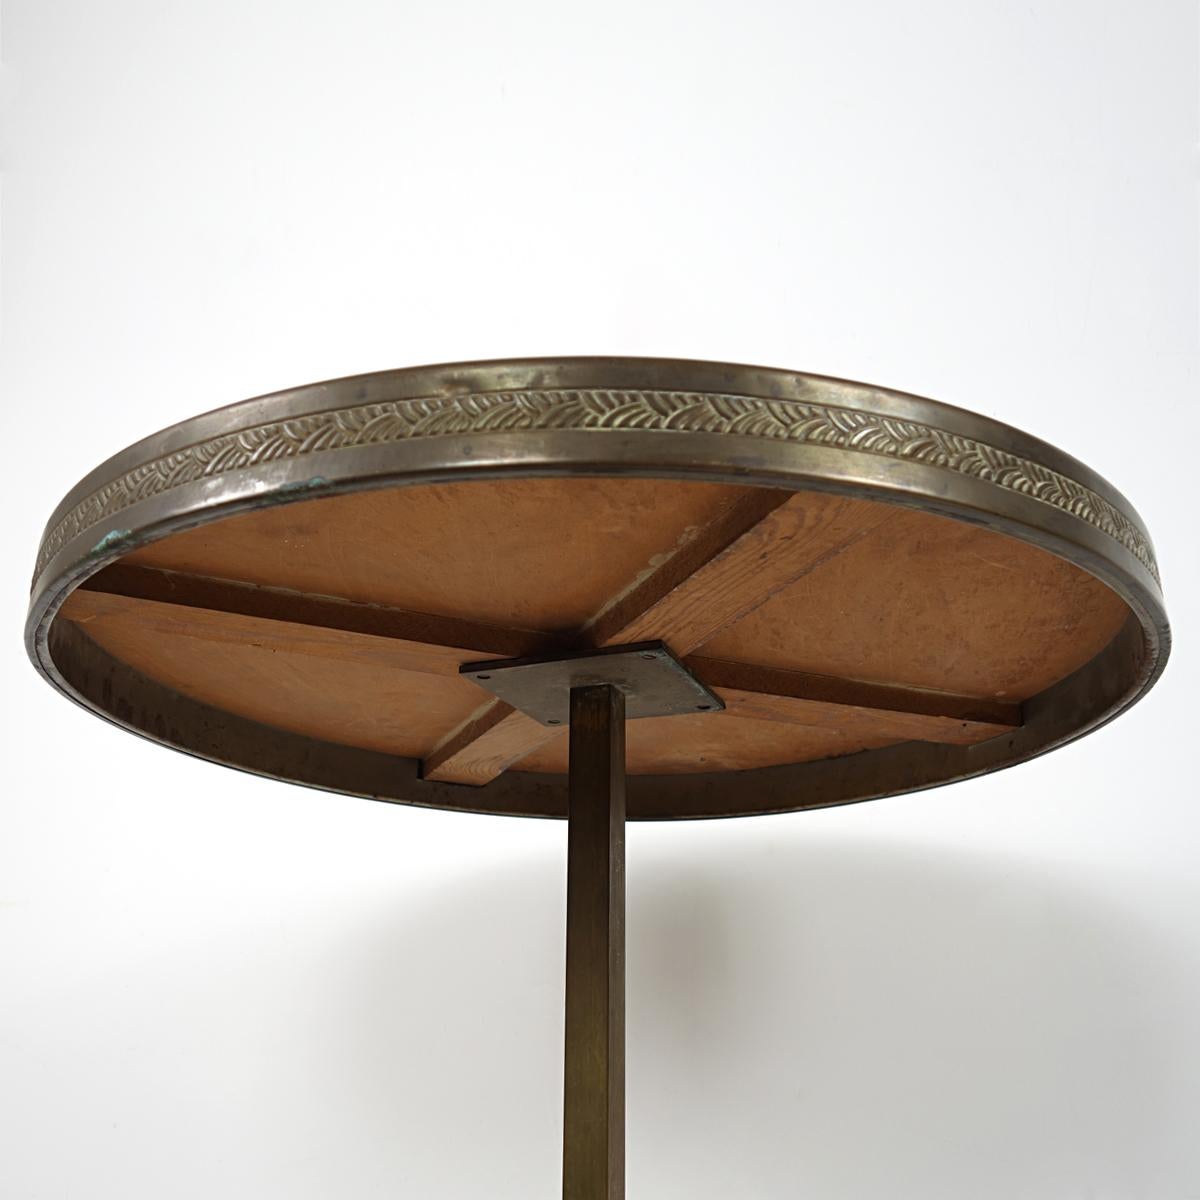 Antique Moroccan Occasional Table with Hammered and Engraved Copper Top 5